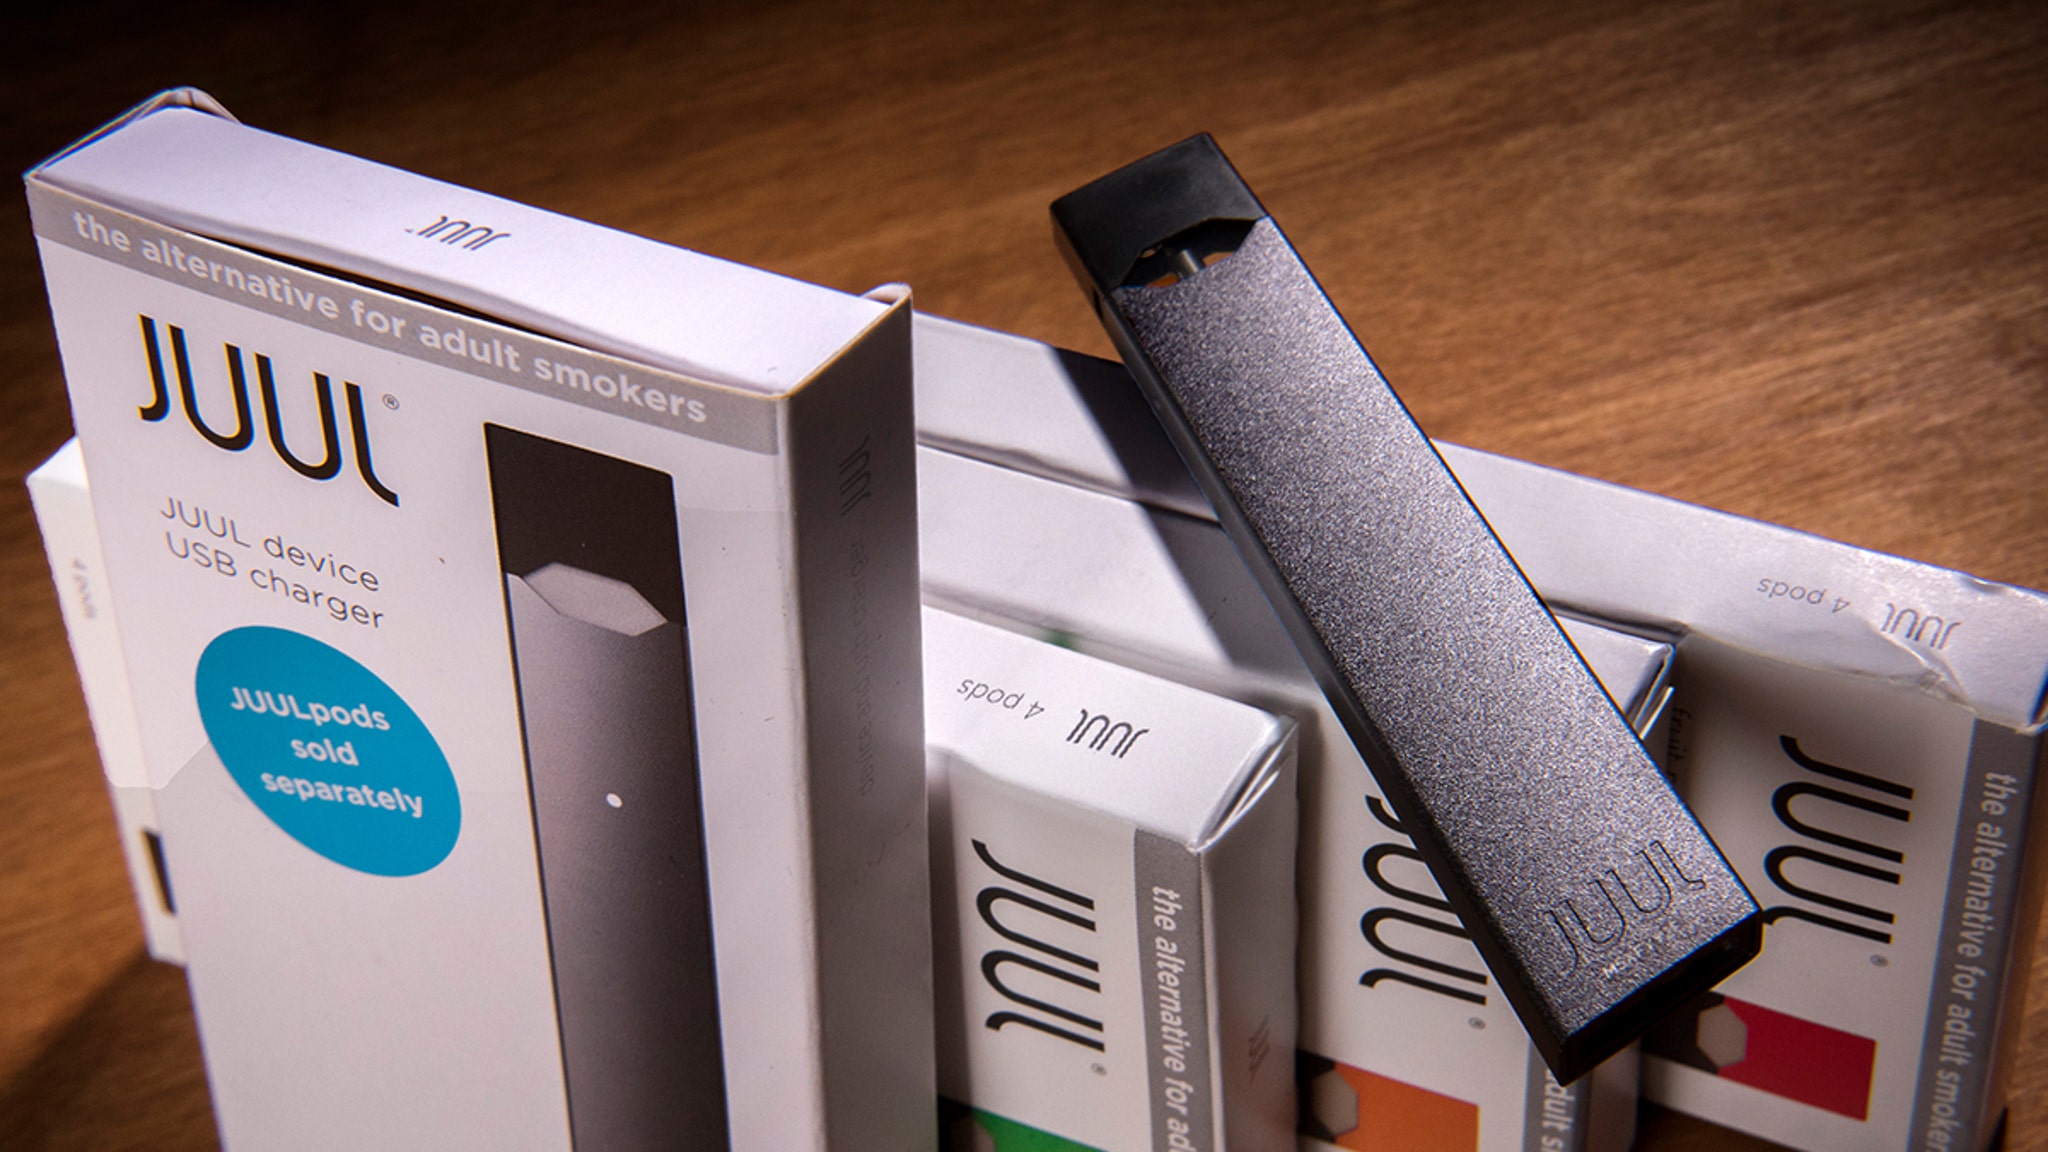 Juul E-Cigarettes To Be Banned In the U.S., WSJ Report